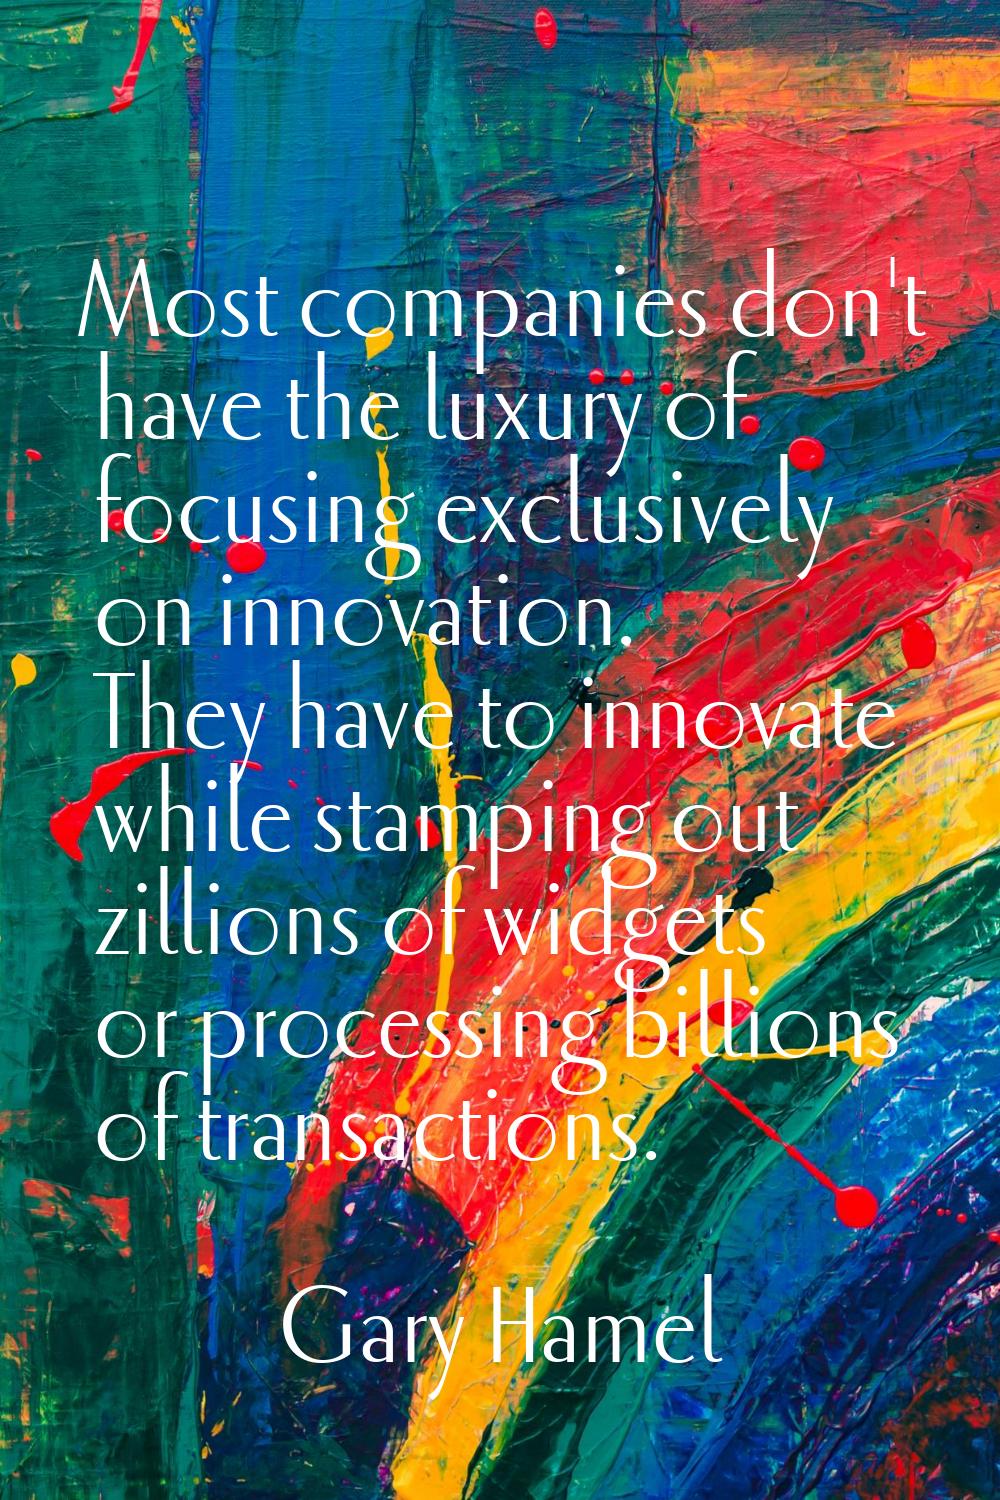 Most companies don't have the luxury of focusing exclusively on innovation. They have to innovate w